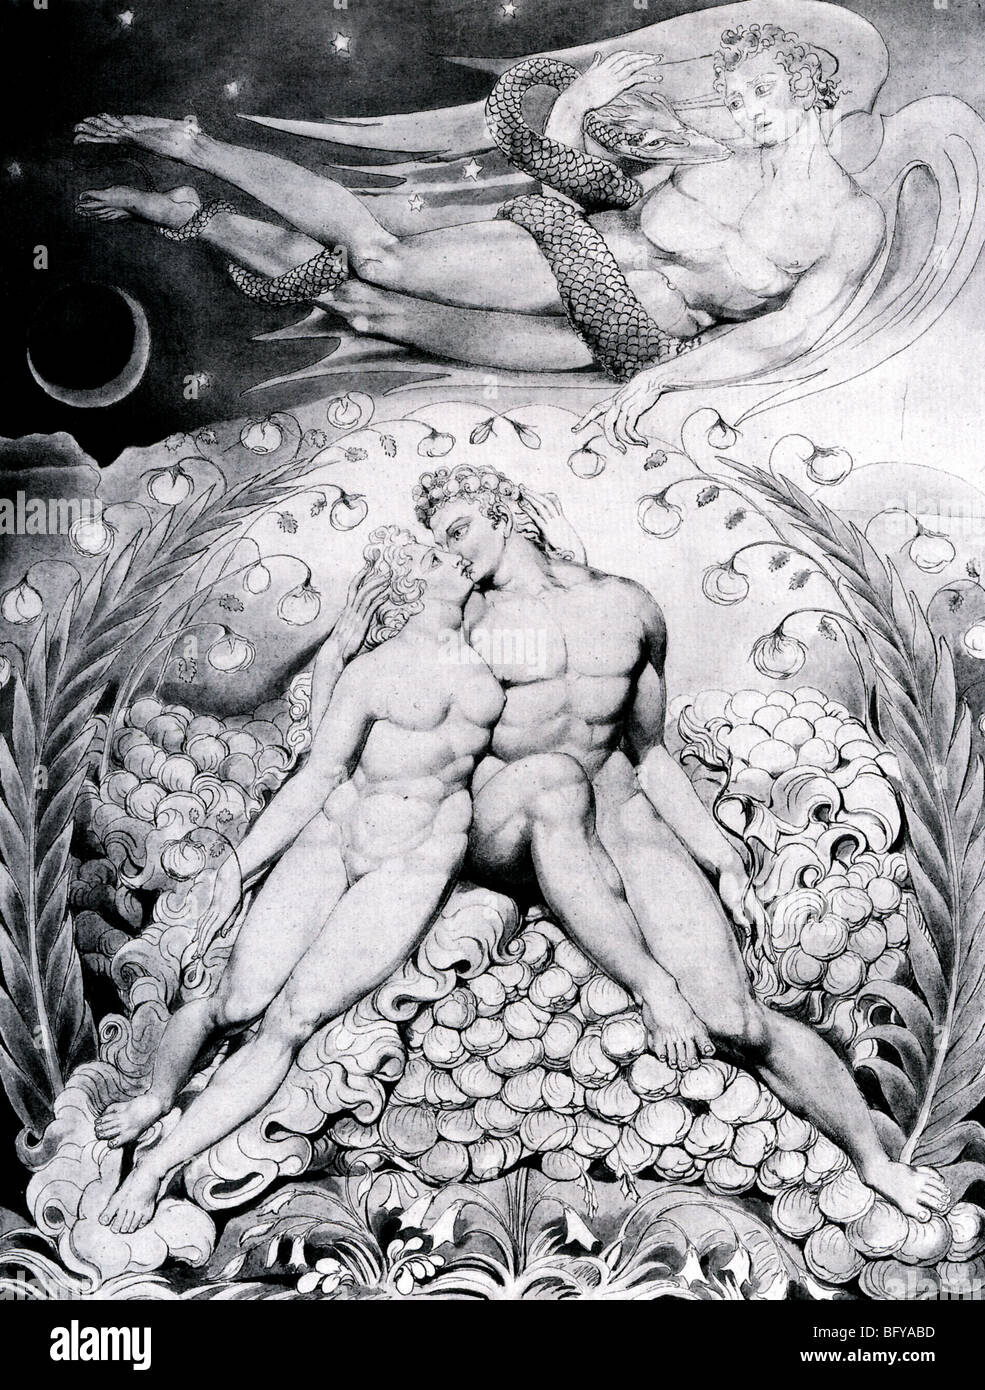 PARADISE LOST illustration by William Blake in 1807 shows Adam and Eve watched by Satan holding a serpent Stock Photo